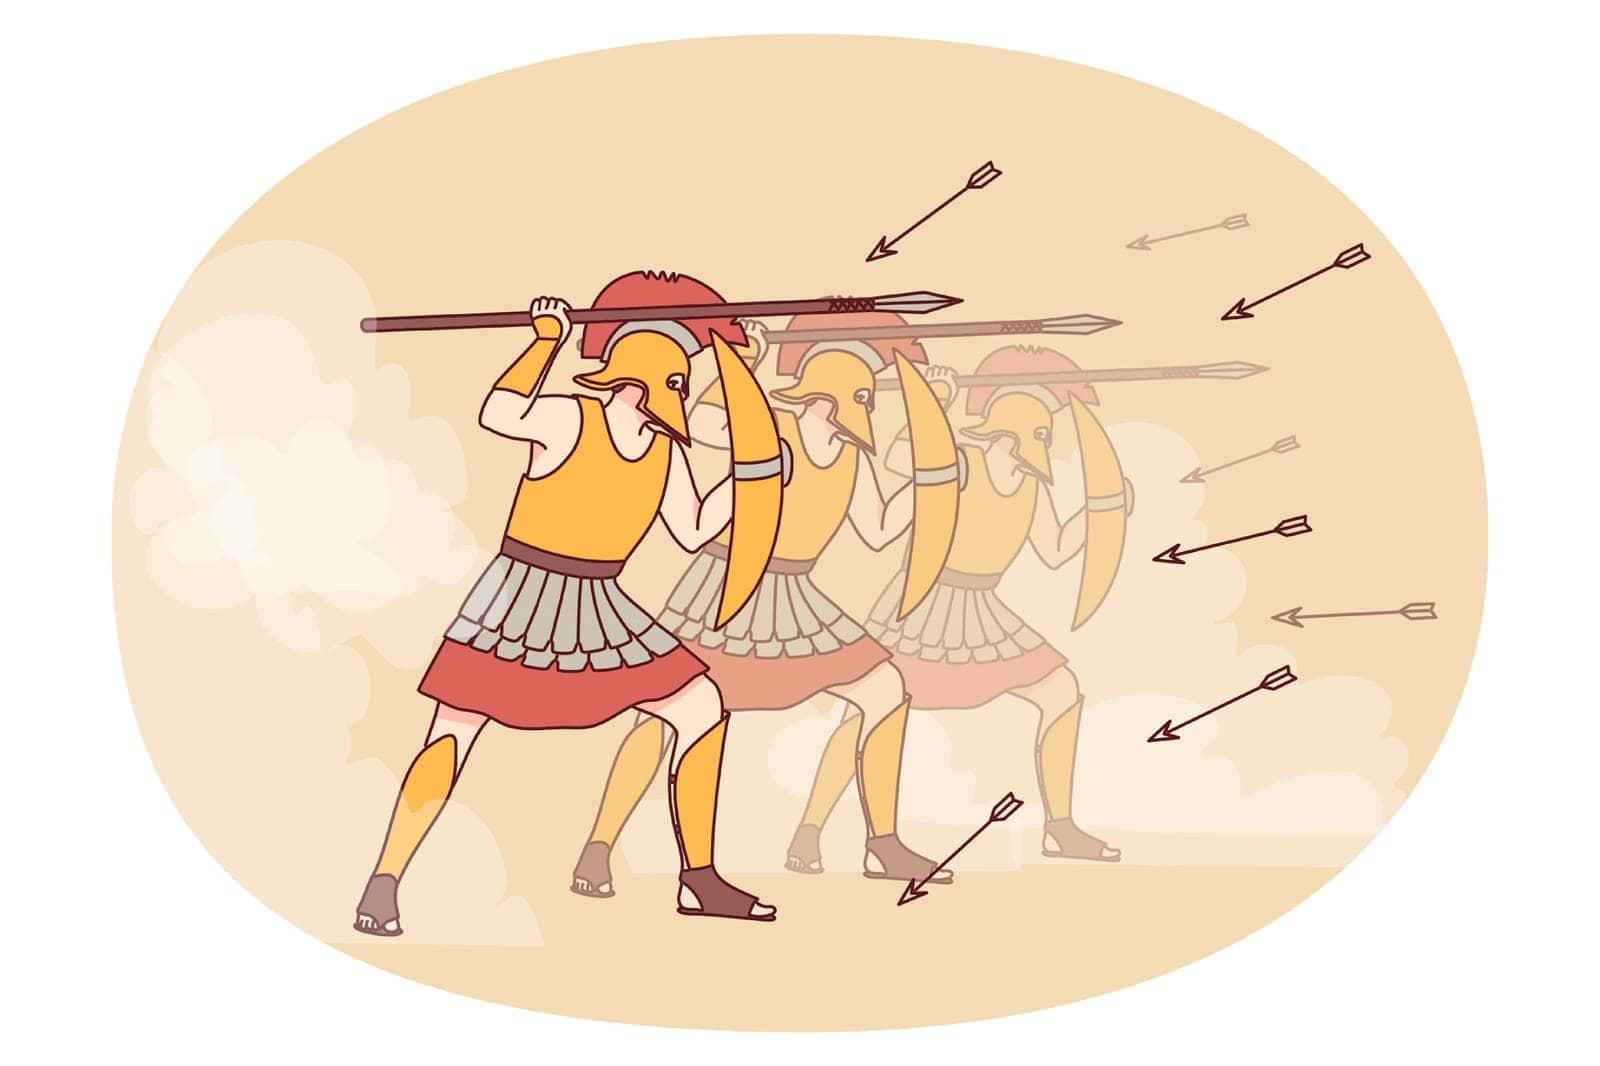 Spartans in armor with shields and spears go on attack. Squad of warriors in protective garment assail together. War and ancient ages. Vector illustration.